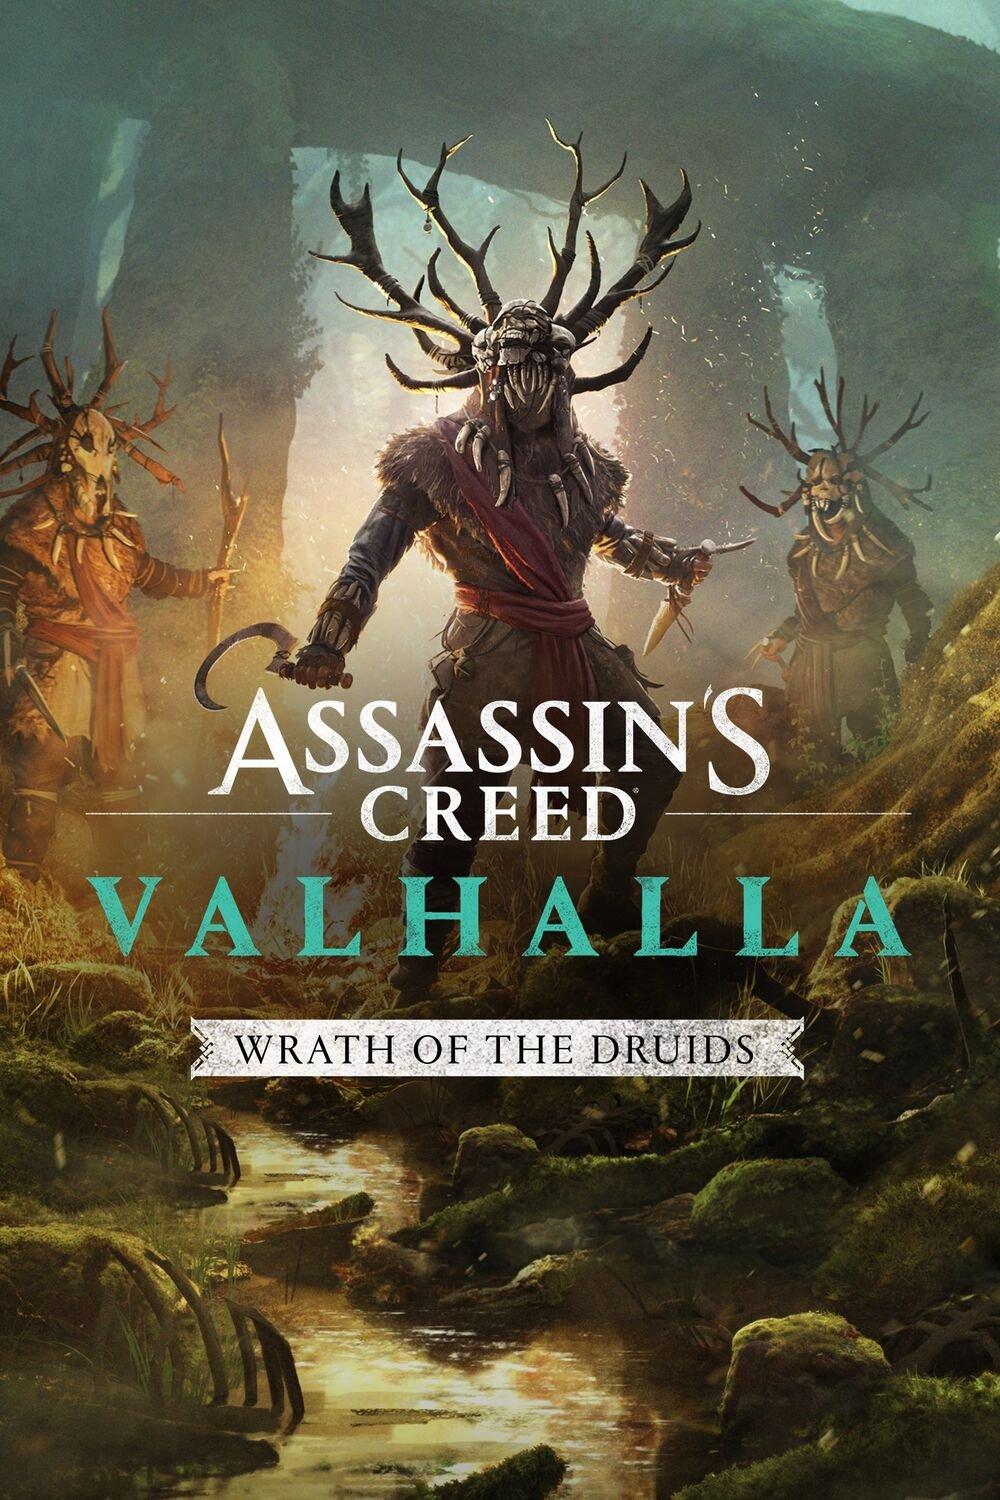 Assassin's Creed Valhalla: Wrath of the Druids DLC Review 